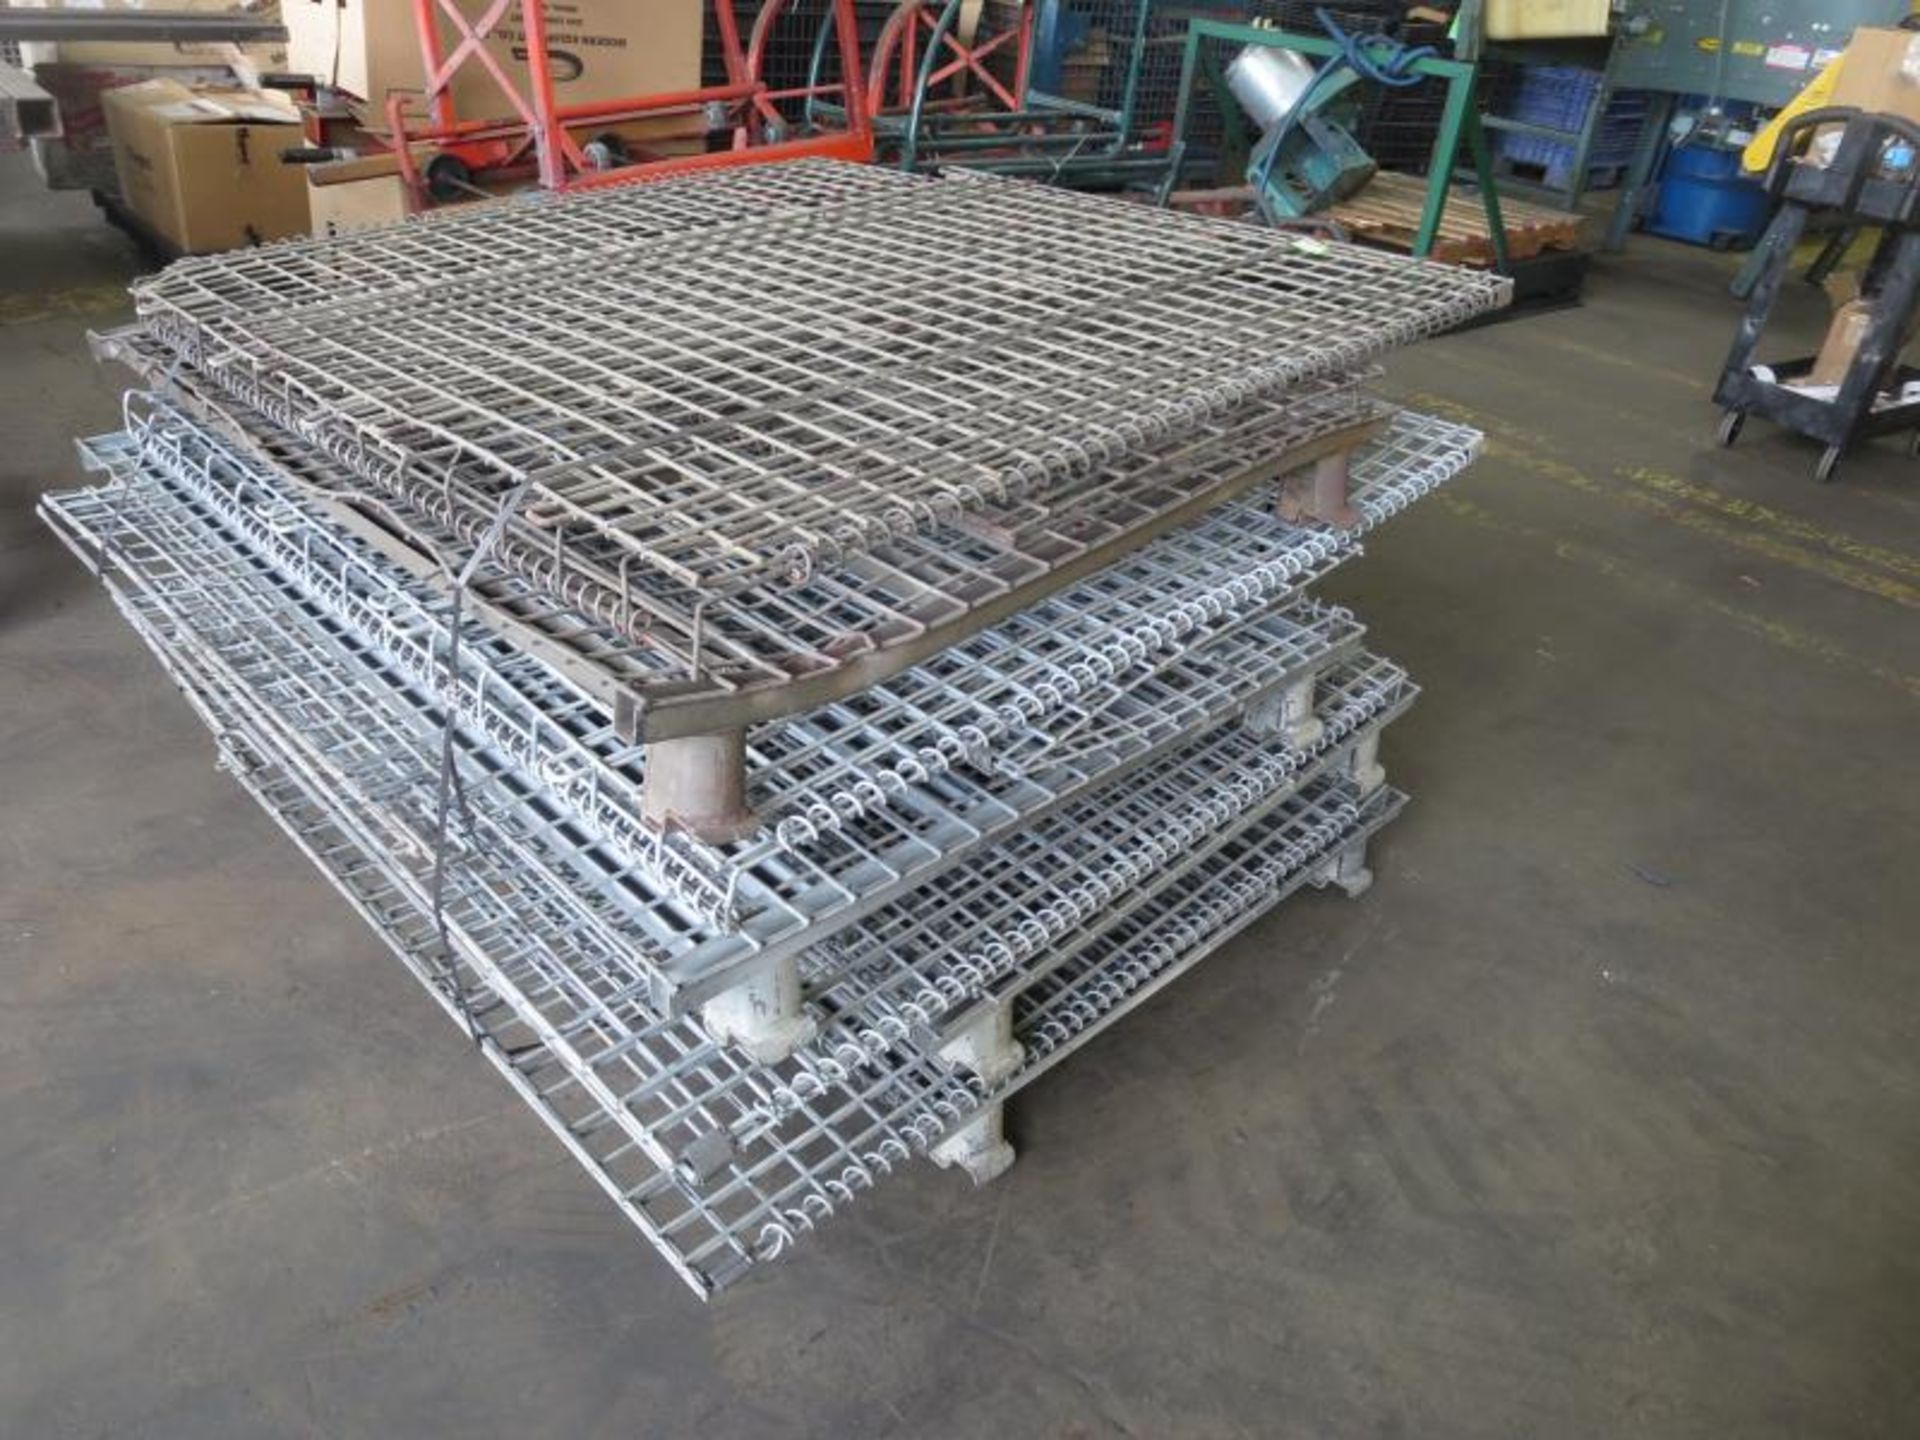 Lot (Qty 4) Wire Totes, approx 40" x 57" x 48"h. Hit # 2185775. M8-M9. Asset Located at 1425 S. - Bild 2 aus 2